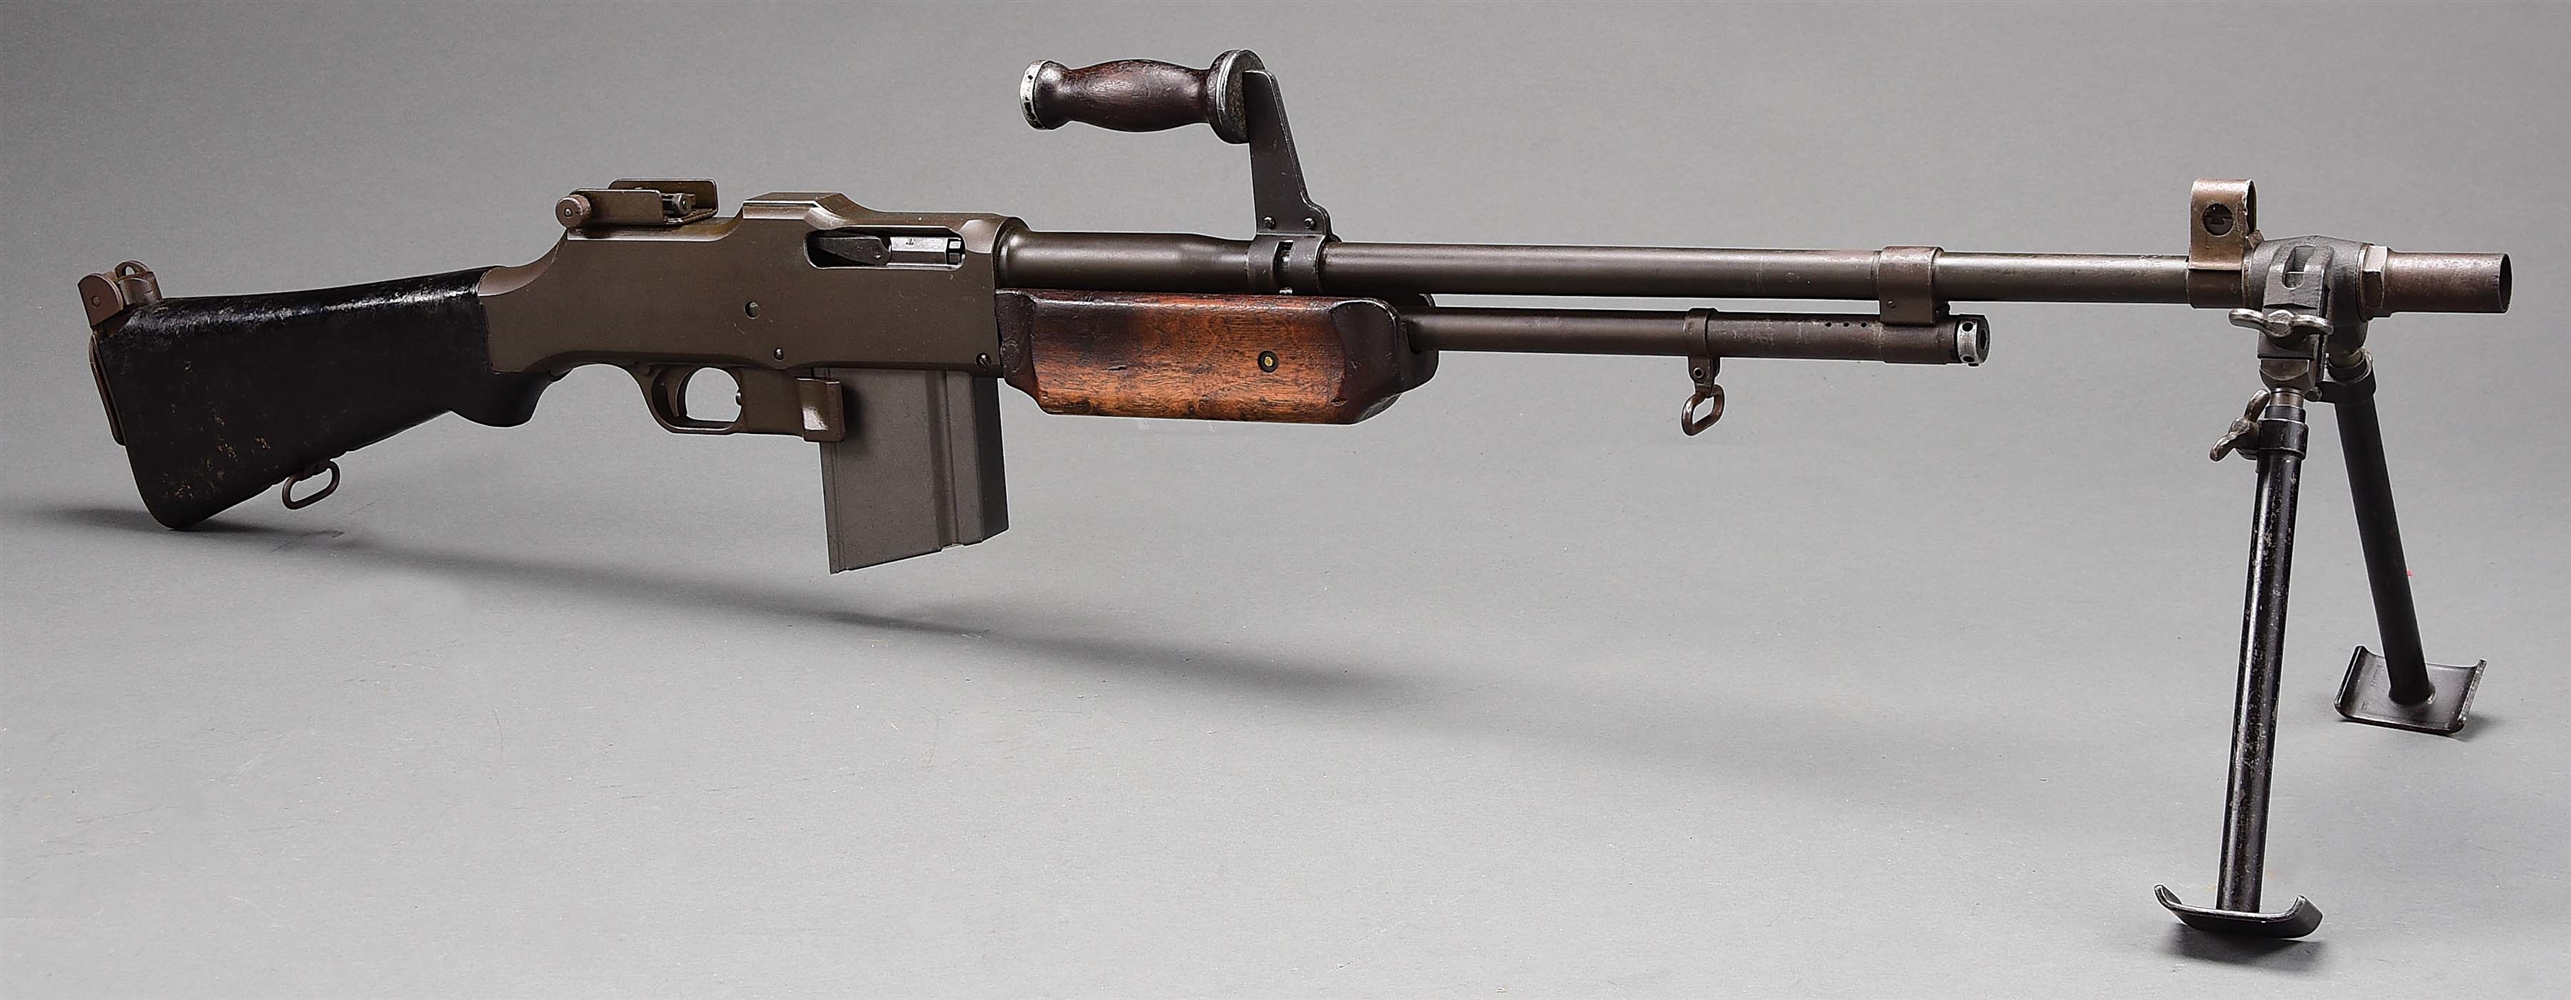 (N) OUTSTANDING AND RARE ORIGINAL LEND-LEASE ROYAL TYPEWRITER MODEL 1918A2 BROWNING AUTOMTIC RIFLE (B.A.R) MACHINE GUN (PRE-86 DEALER SAMPLE).